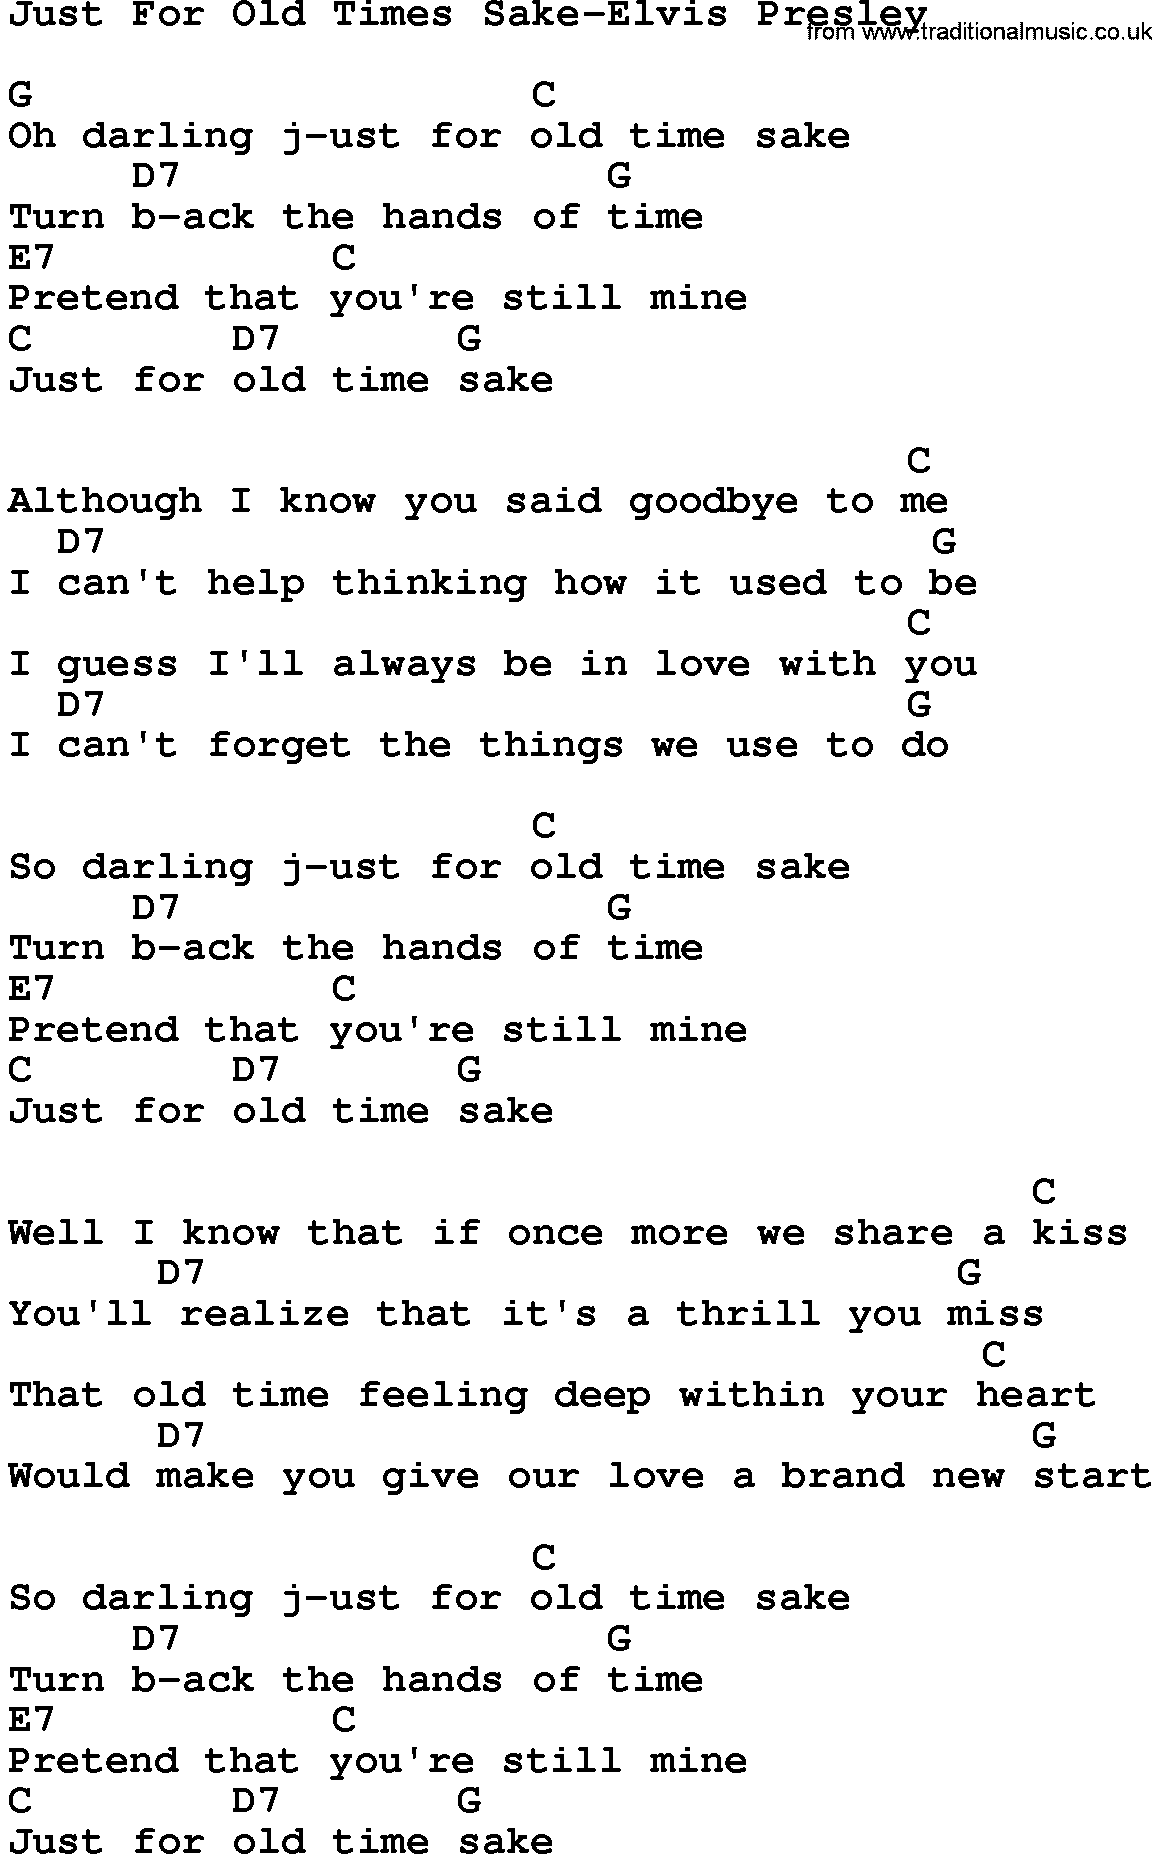 Country music song: Just For Old Times Sake-Elvis Presley lyrics and chords